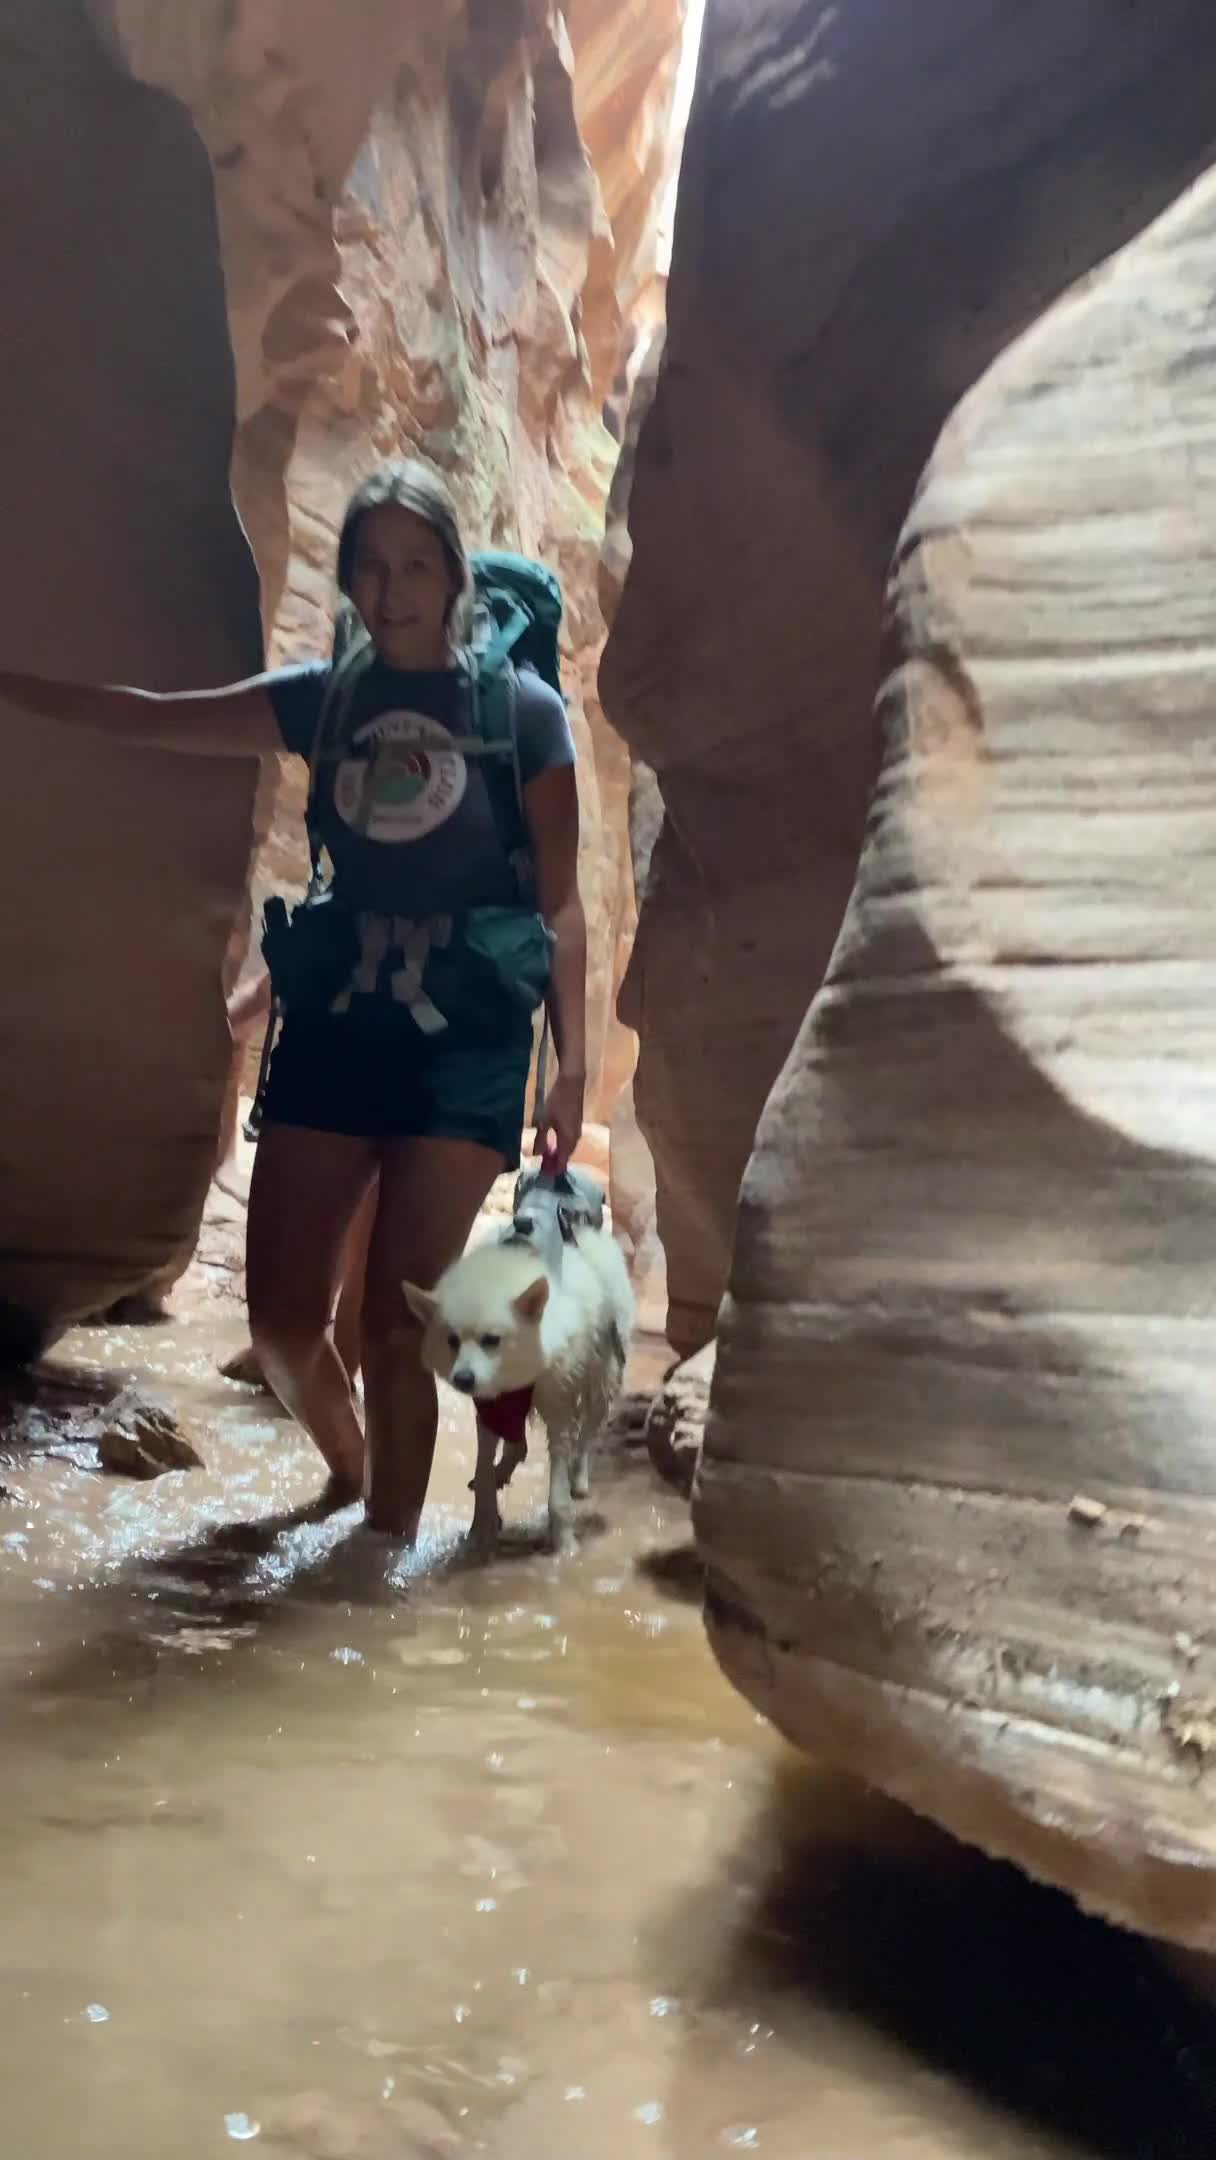 Dog Goes on Canyoneering Adventure With Owner